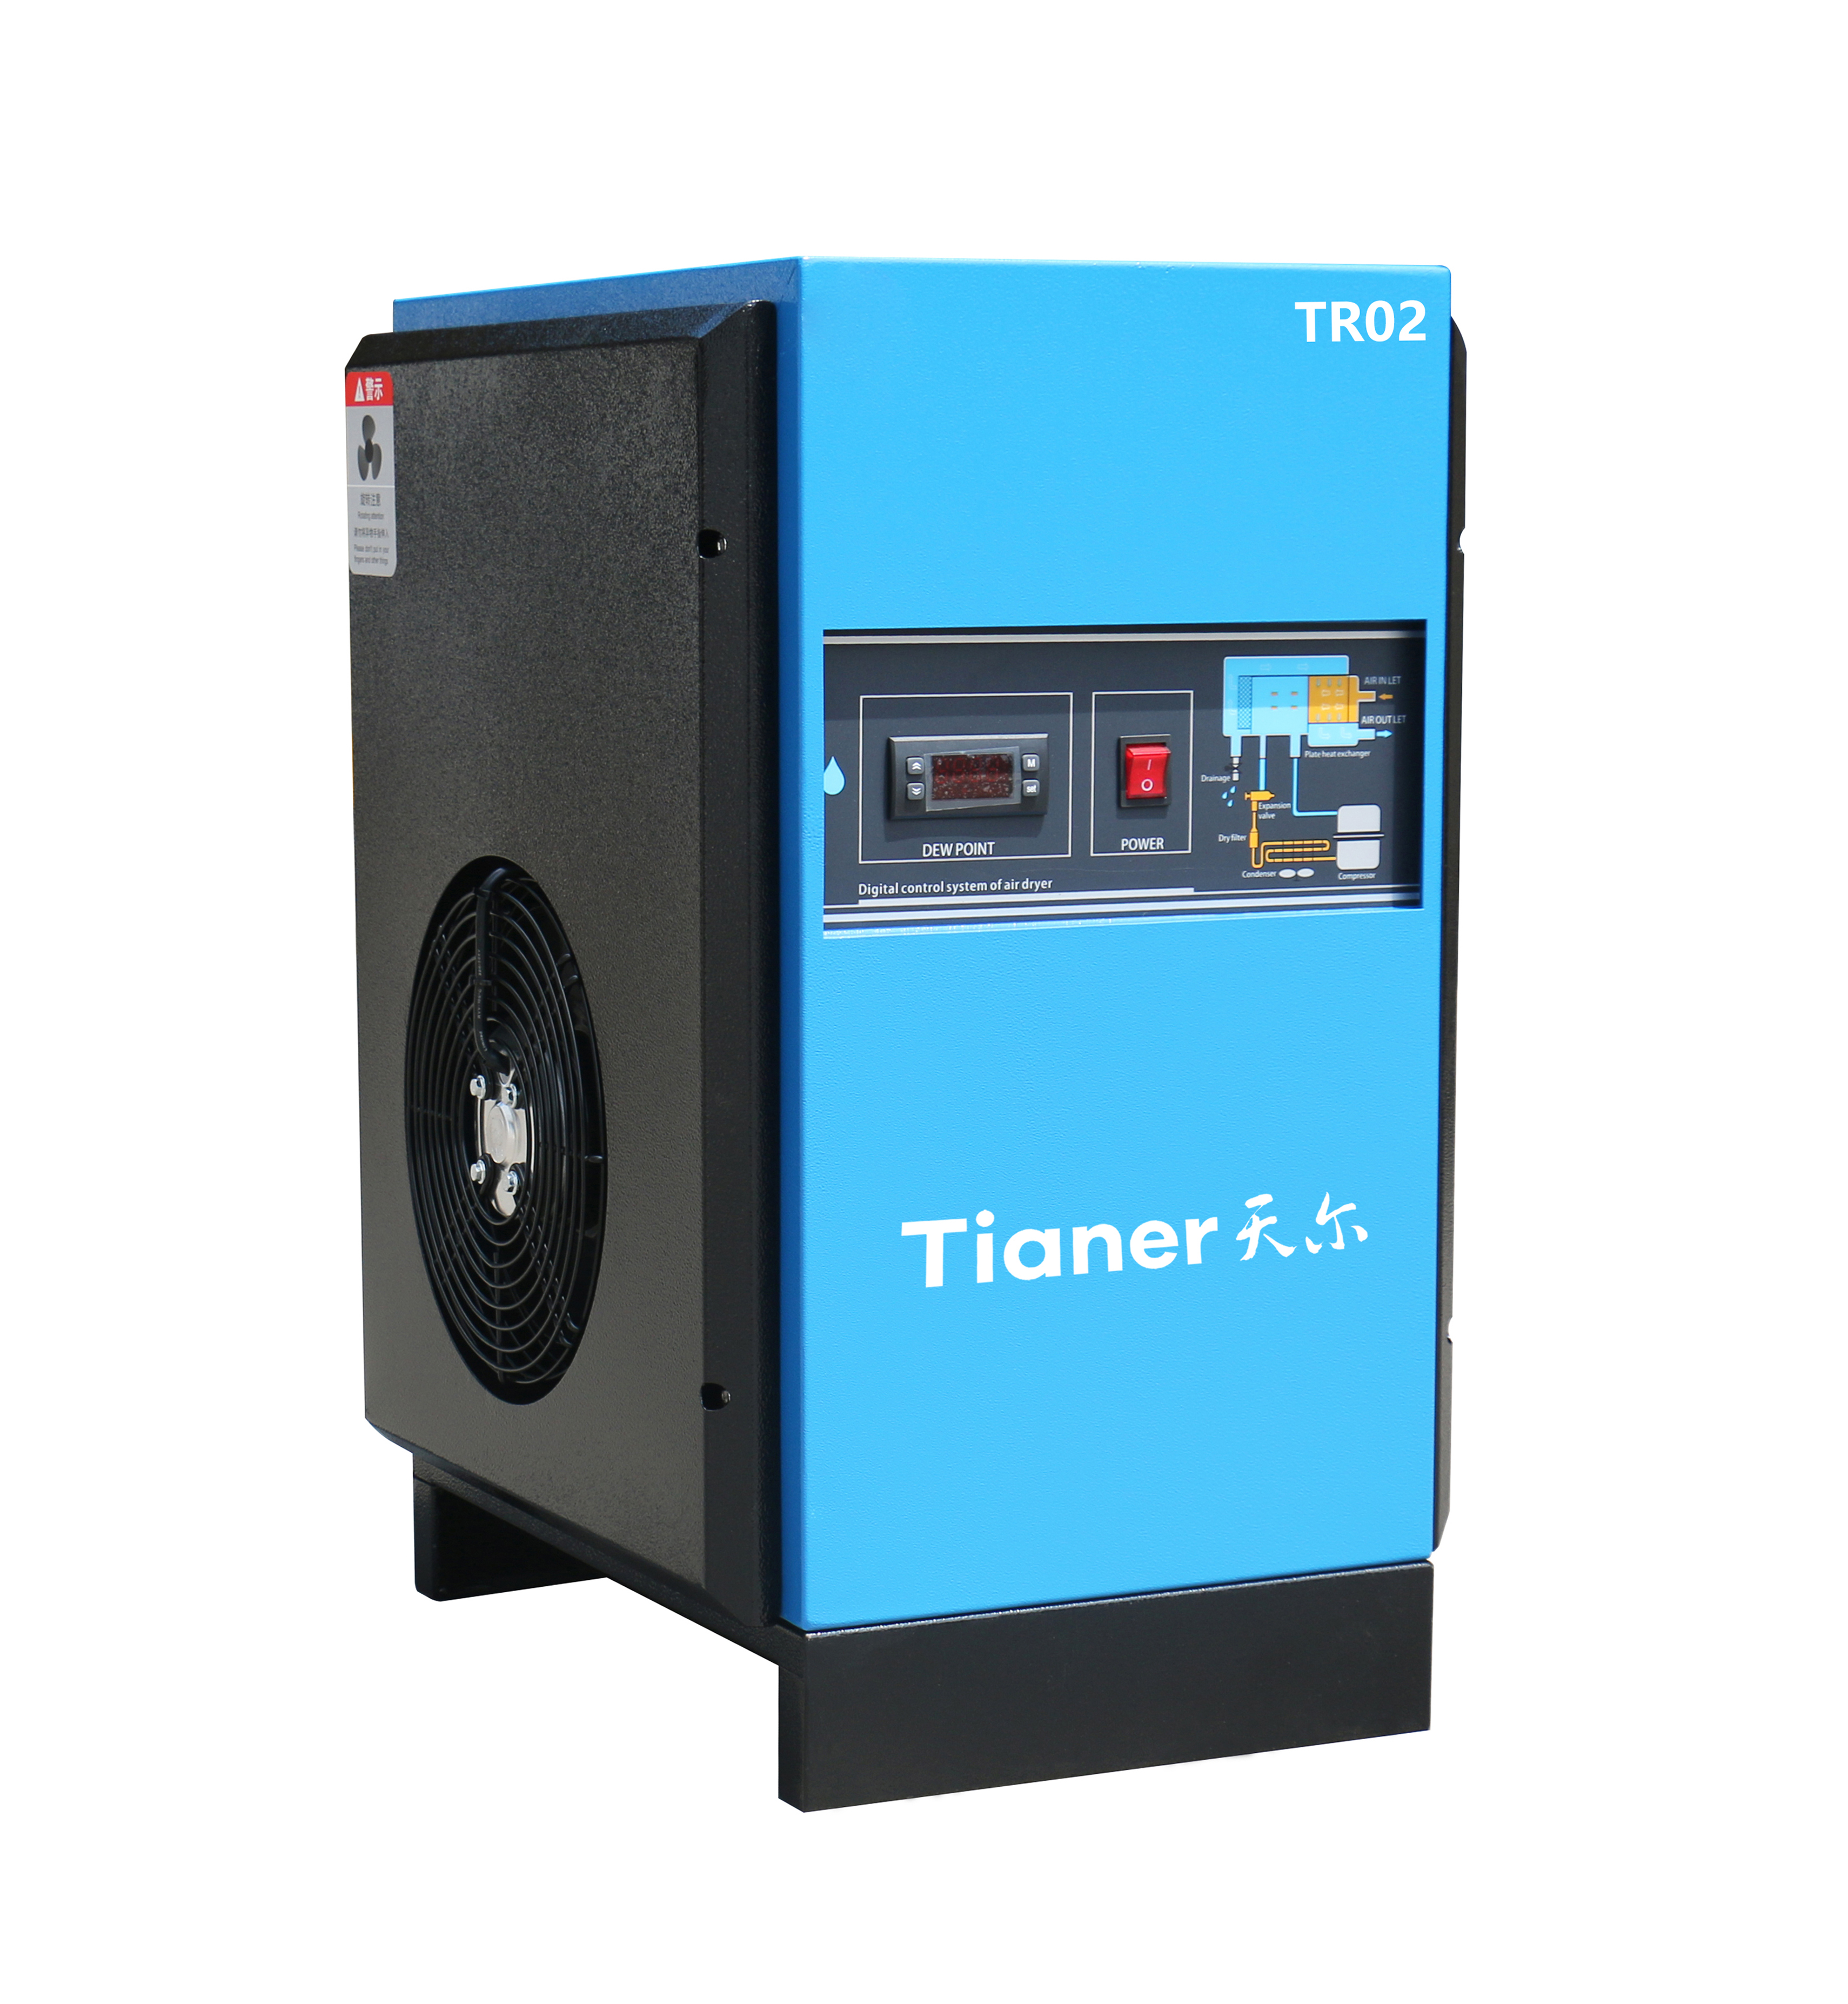 https://www.yctrairdryer.com/compressed-drier-machine-tr-01-for-air-compressor-1-2-m3min-product/